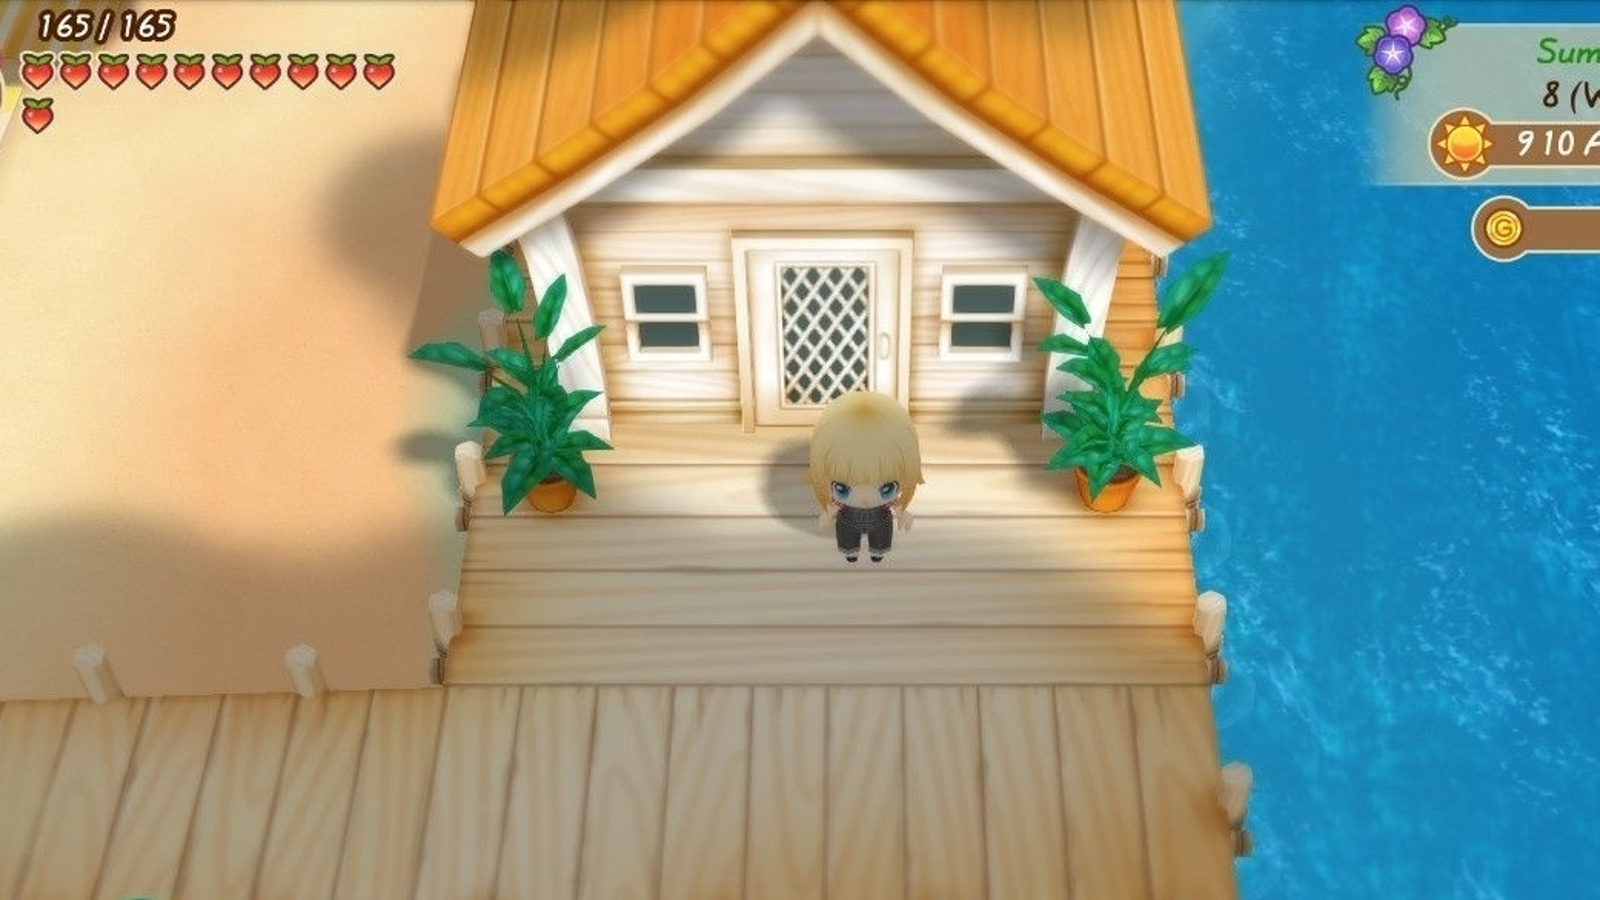 Town of Story Seaside to How unlock cottage the Friends seaside in Cottage: Mineral explained Seasons of